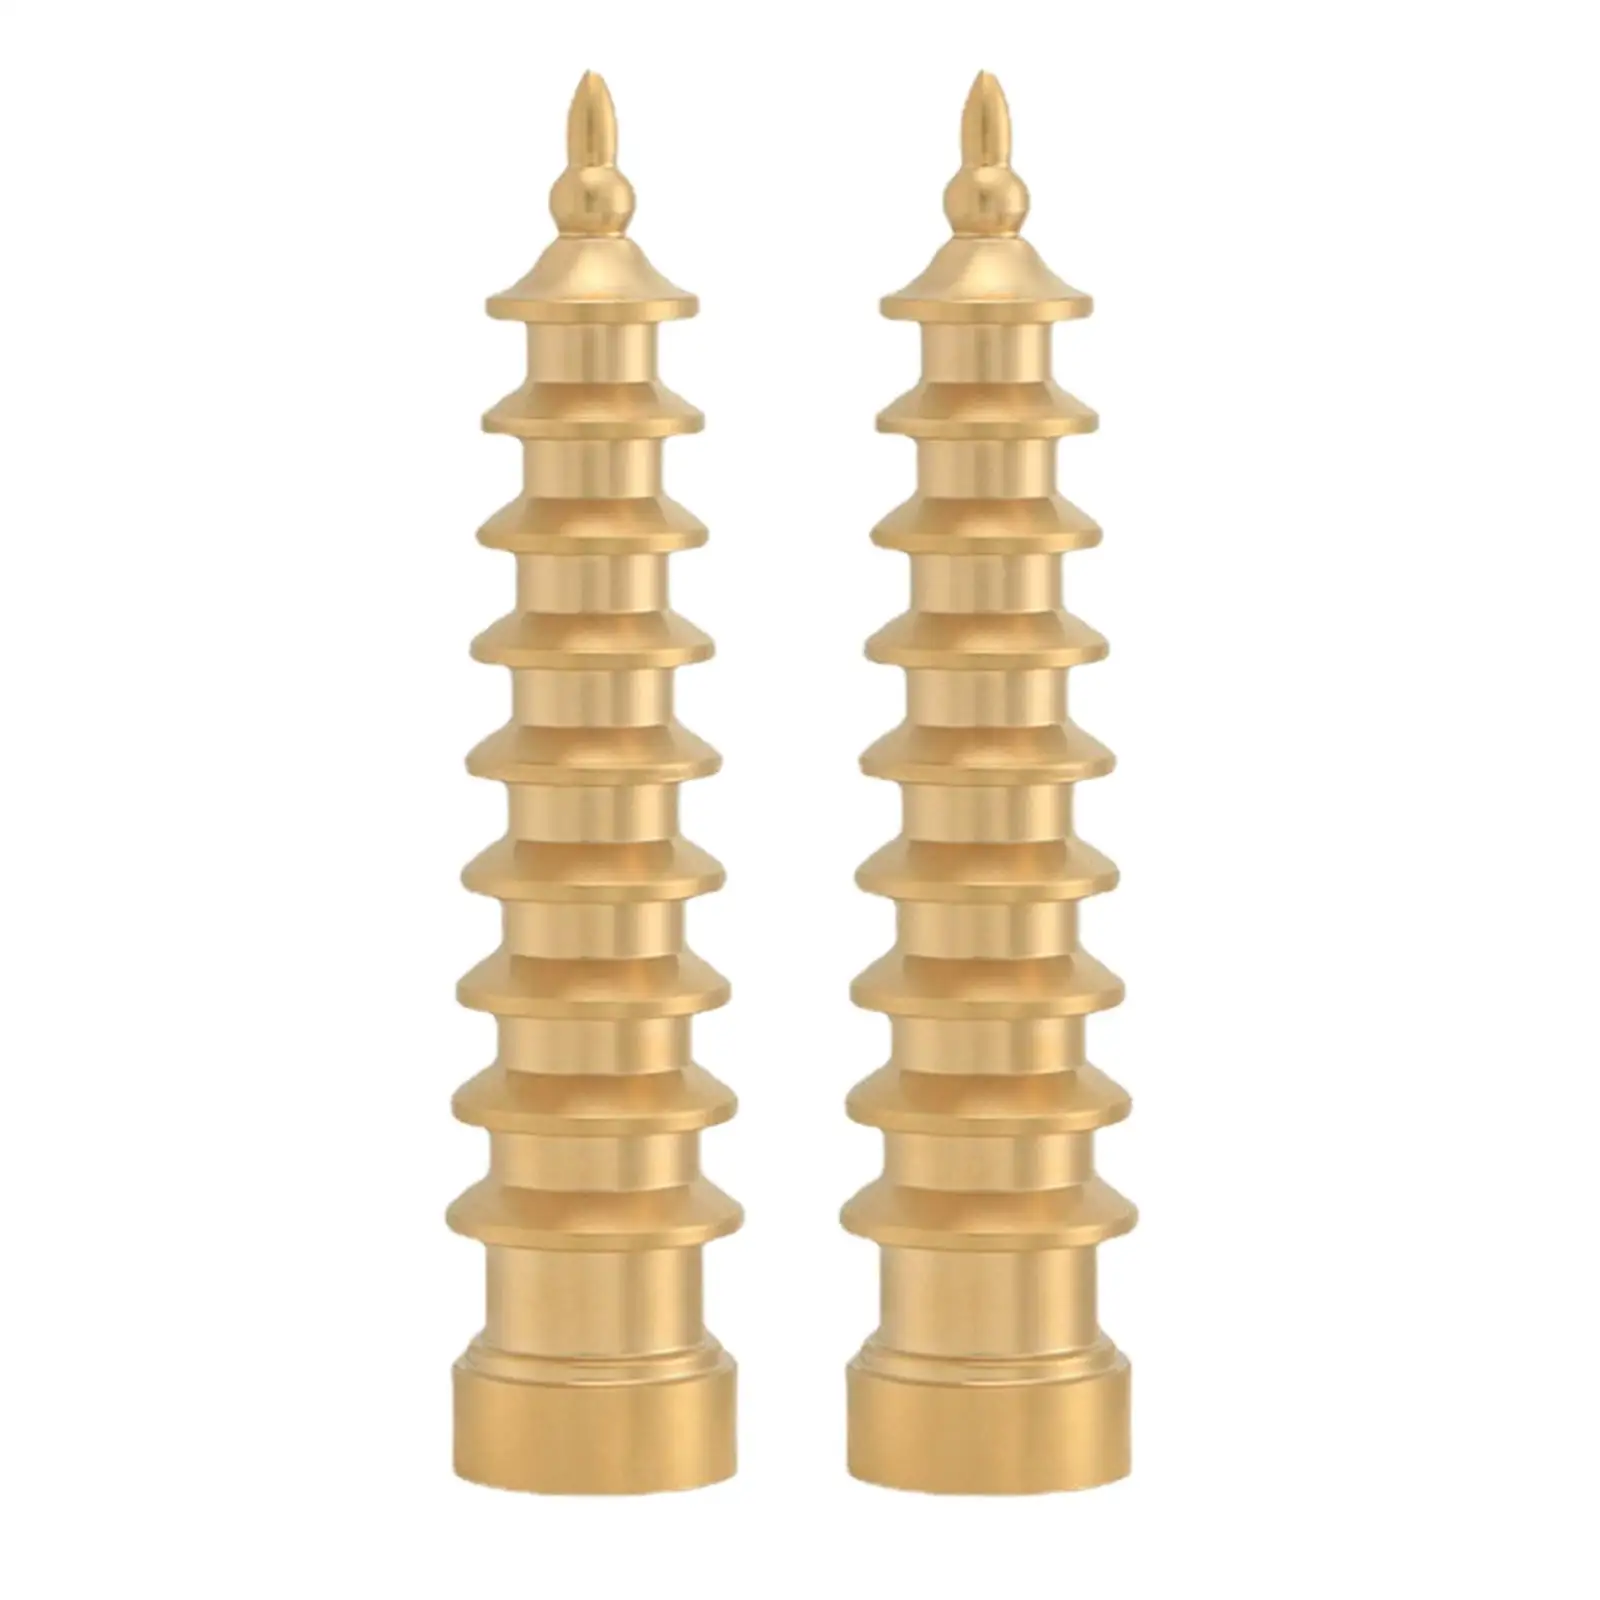 Brass Pagoda Feng Shui Statue Ornaments Protection Business Rises for Office Home